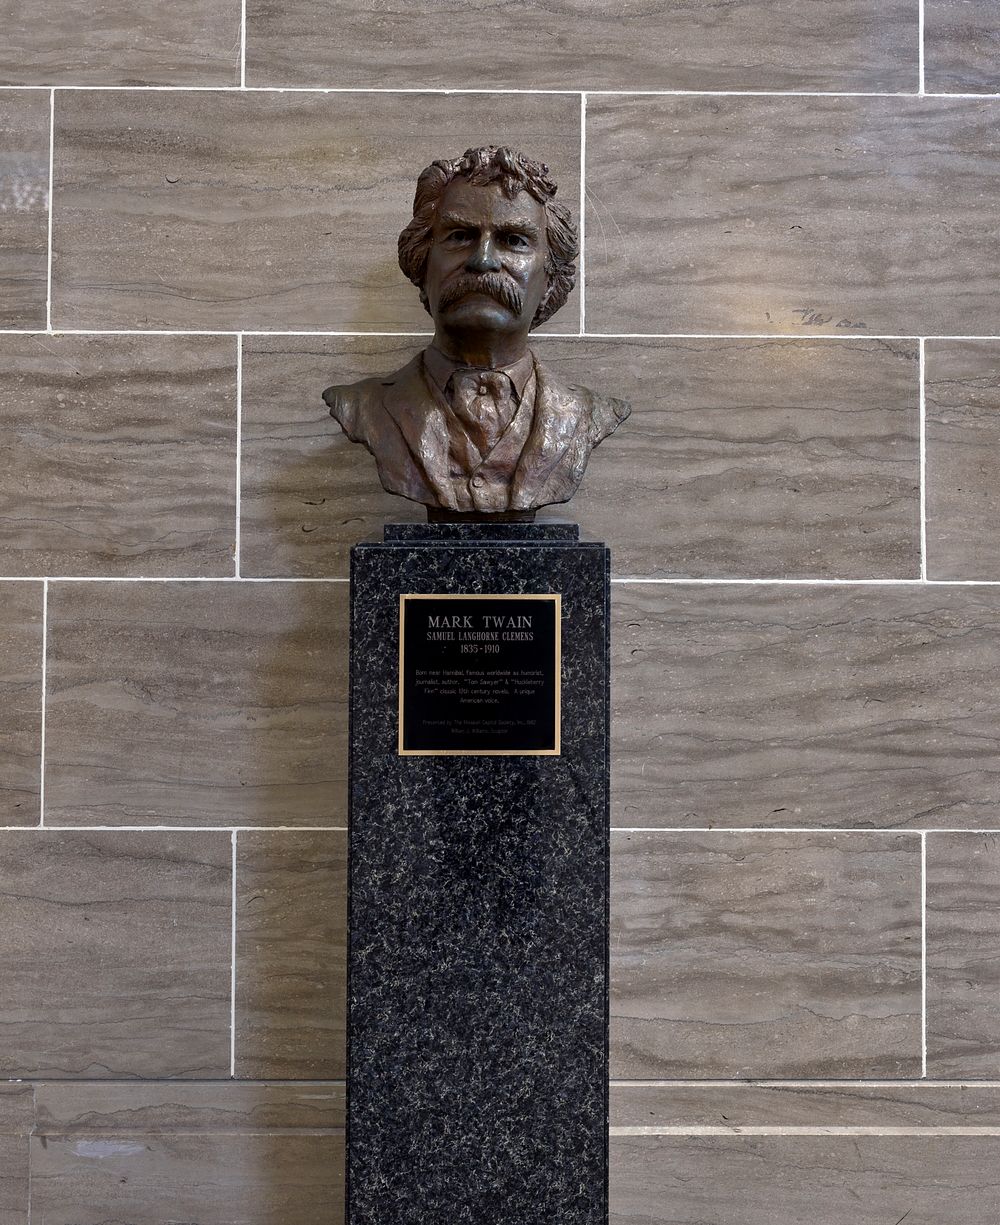                         Bust of author and humorist Mark Twain at the Missouri Capitol in Jefferson City, the capital city…